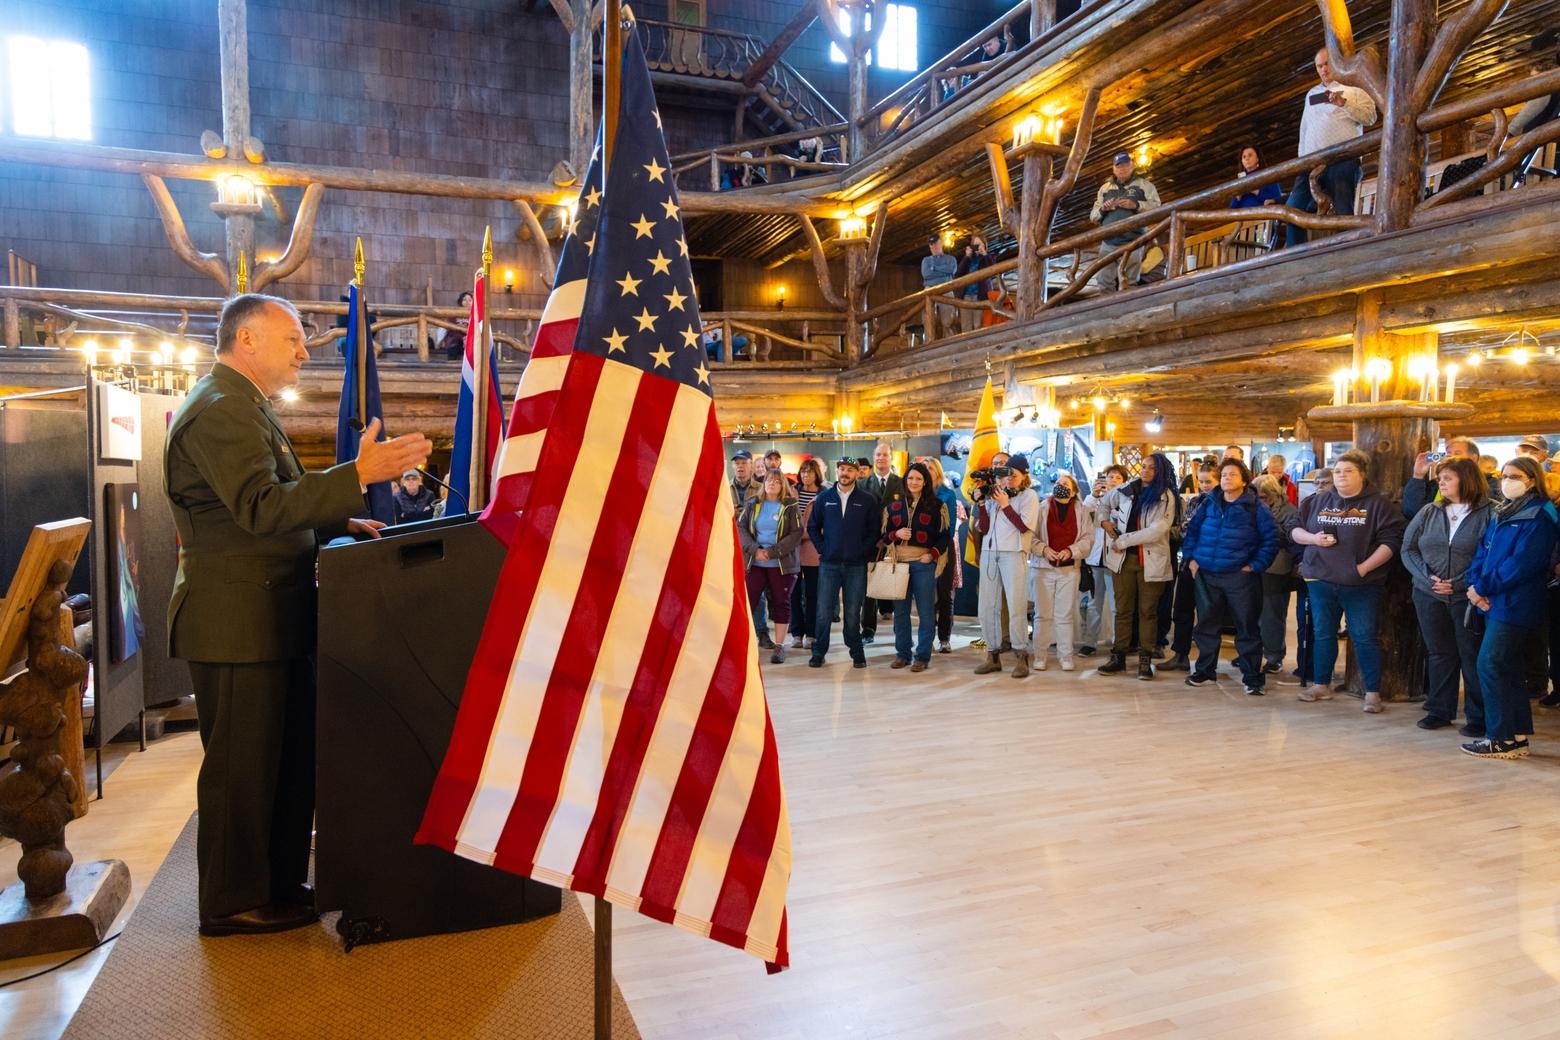  Sholly addresses the crowd at the Yellowstone National Park Lodges 150 Years of Inspiration event in May of 2022. Photo by Jacob W. Frank/NPS